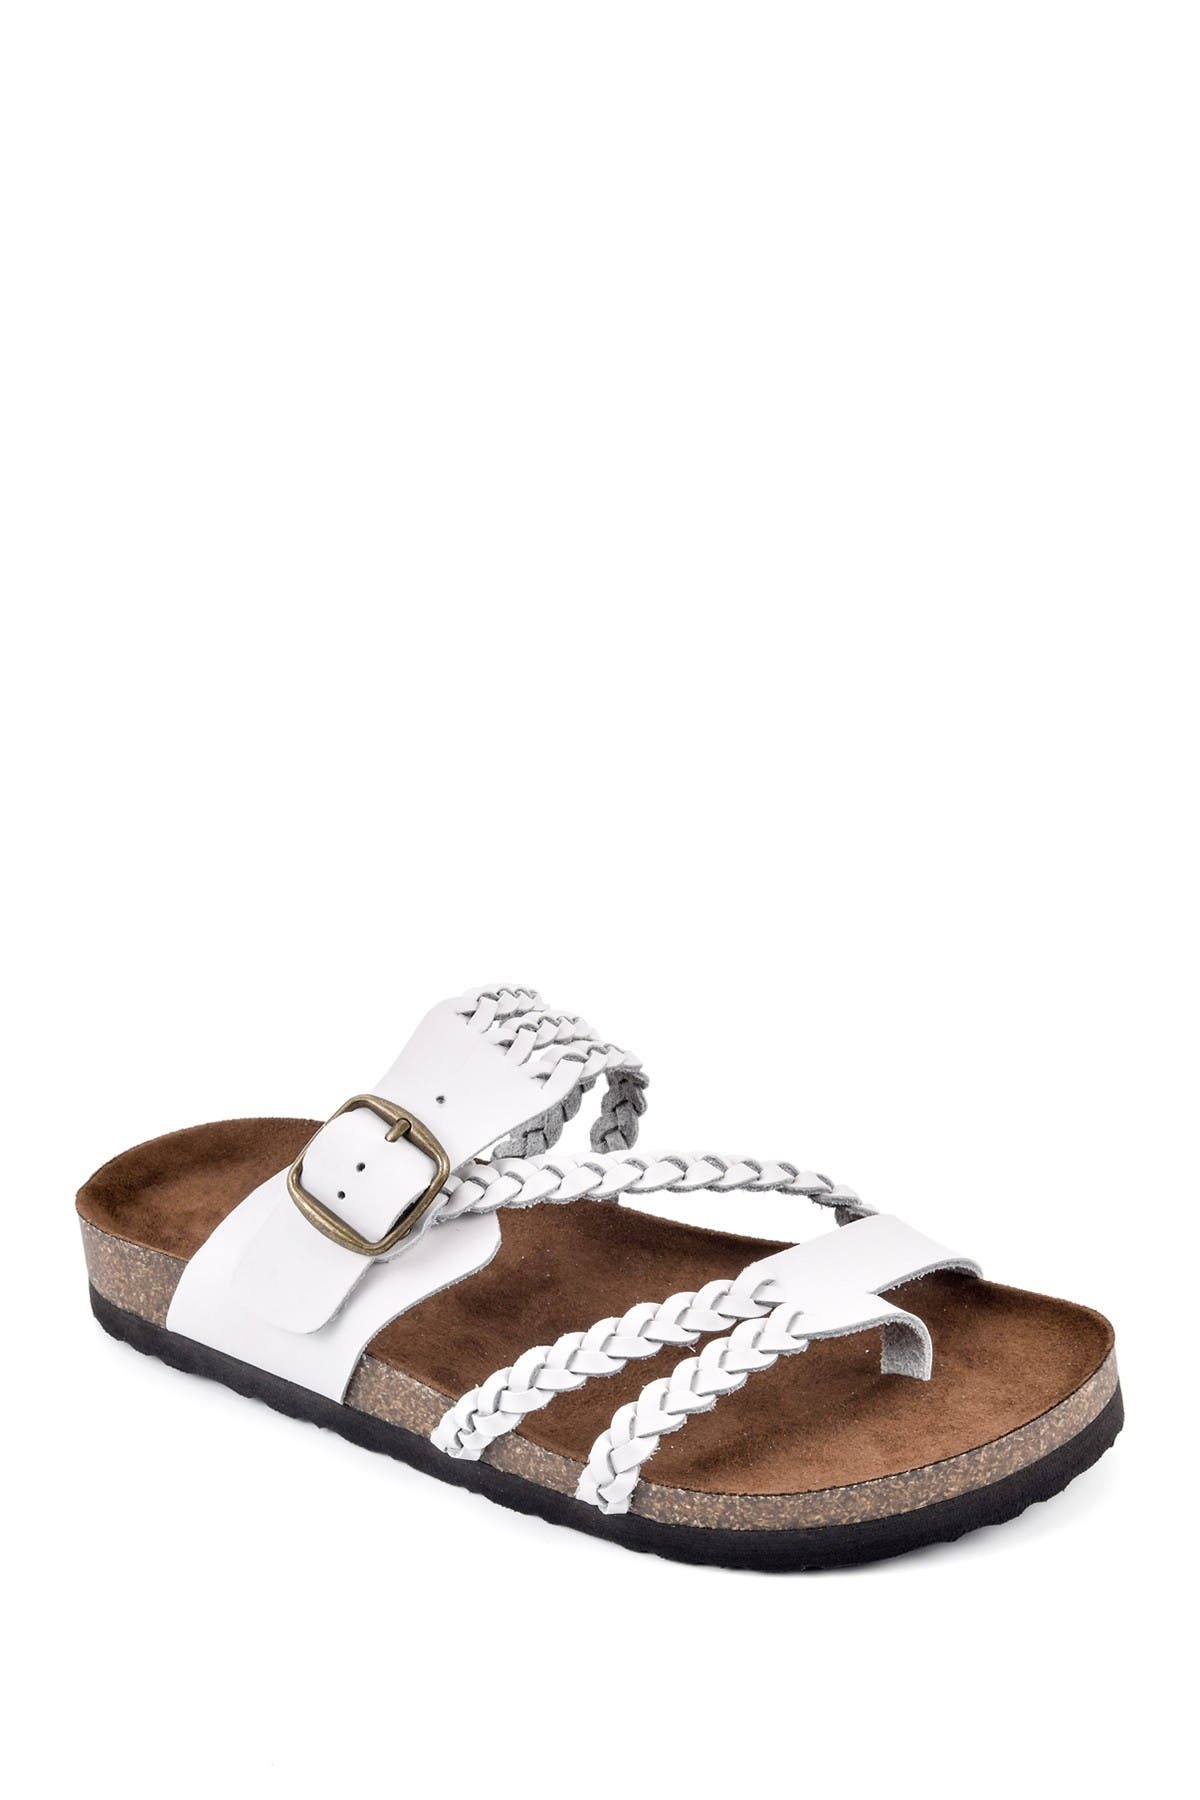 White Mountain Footwear Hayleigh Braided Leather Footbed Sandal In White/leather